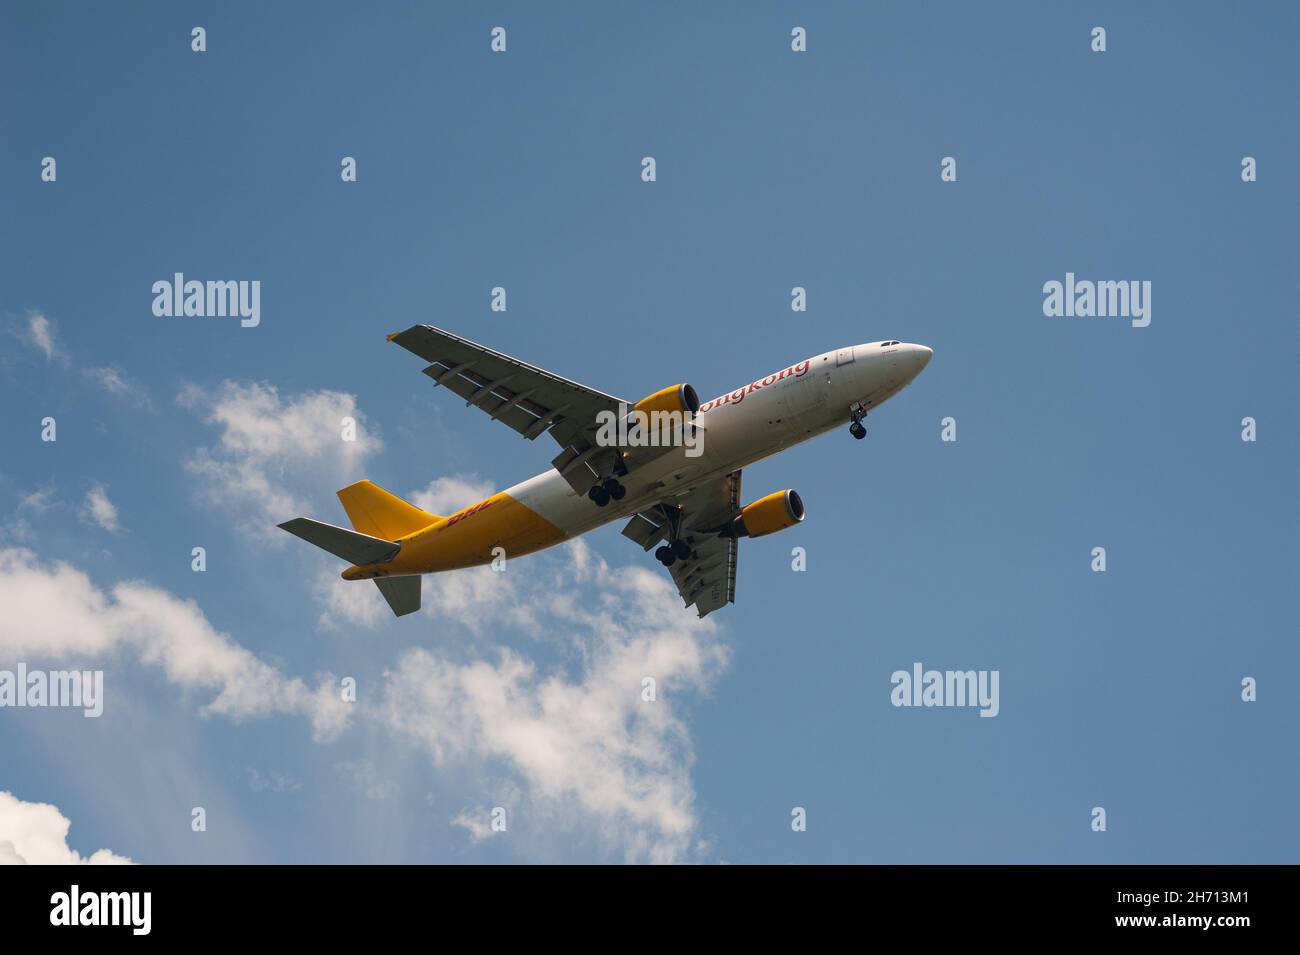 16.11.2021, Singapore, Republic of Singapore, Asia - DHL airline Airbus A300-600F cargo aircraft operated by Air Hong Kong approaches Changi Airport. Stock Photo